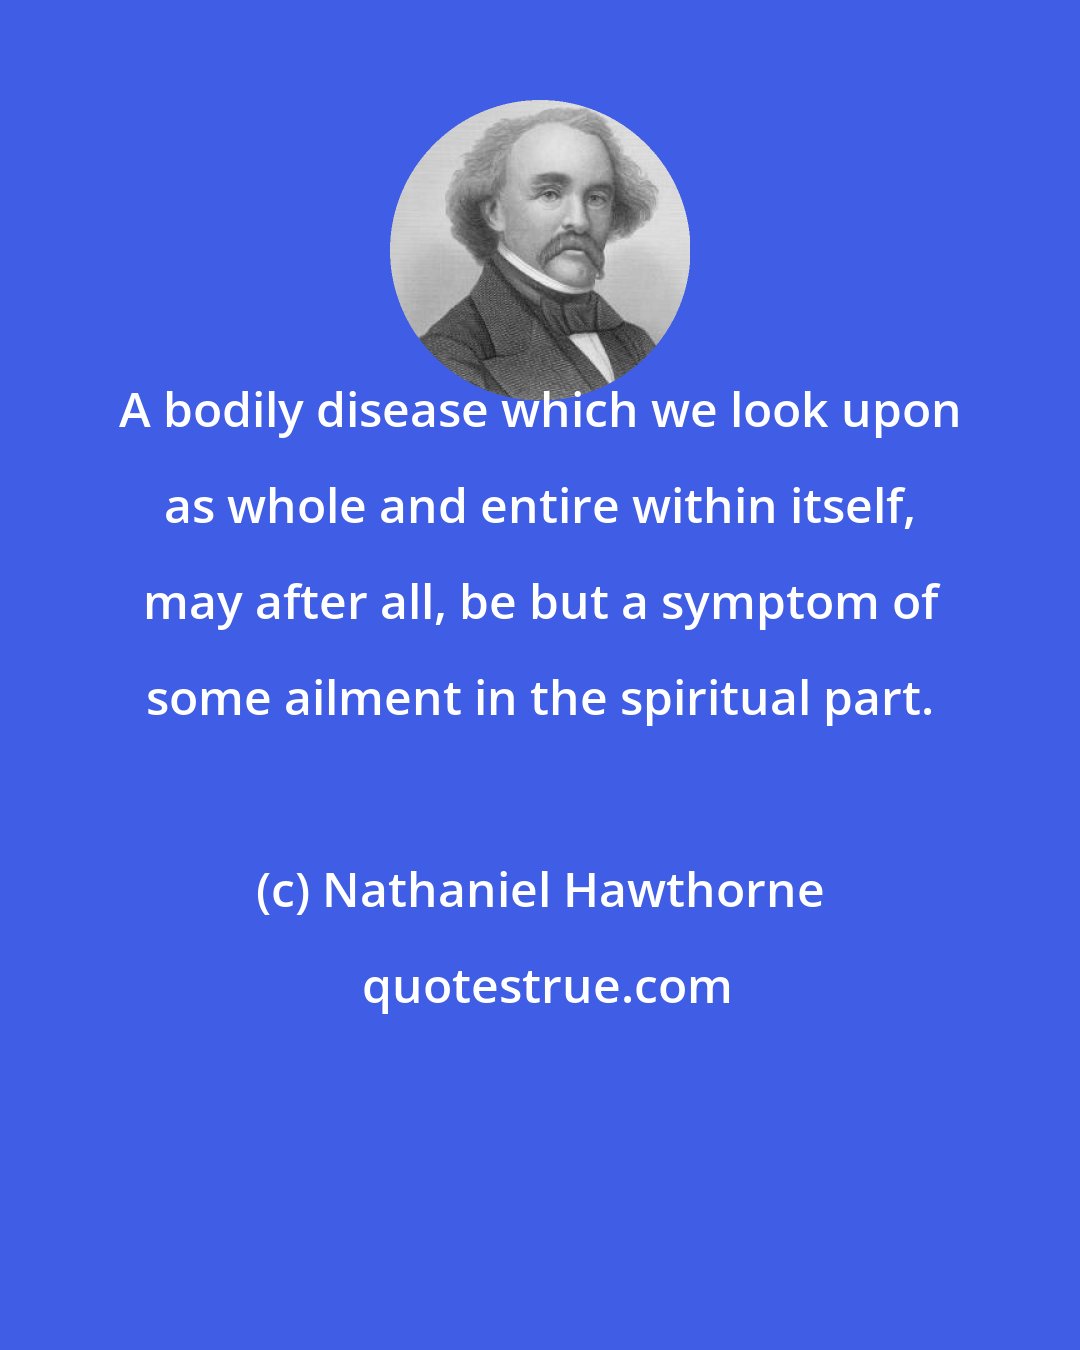 Nathaniel Hawthorne: A bodily disease which we look upon as whole and entire within itself, may after all, be but a symptom of some ailment in the spiritual part.